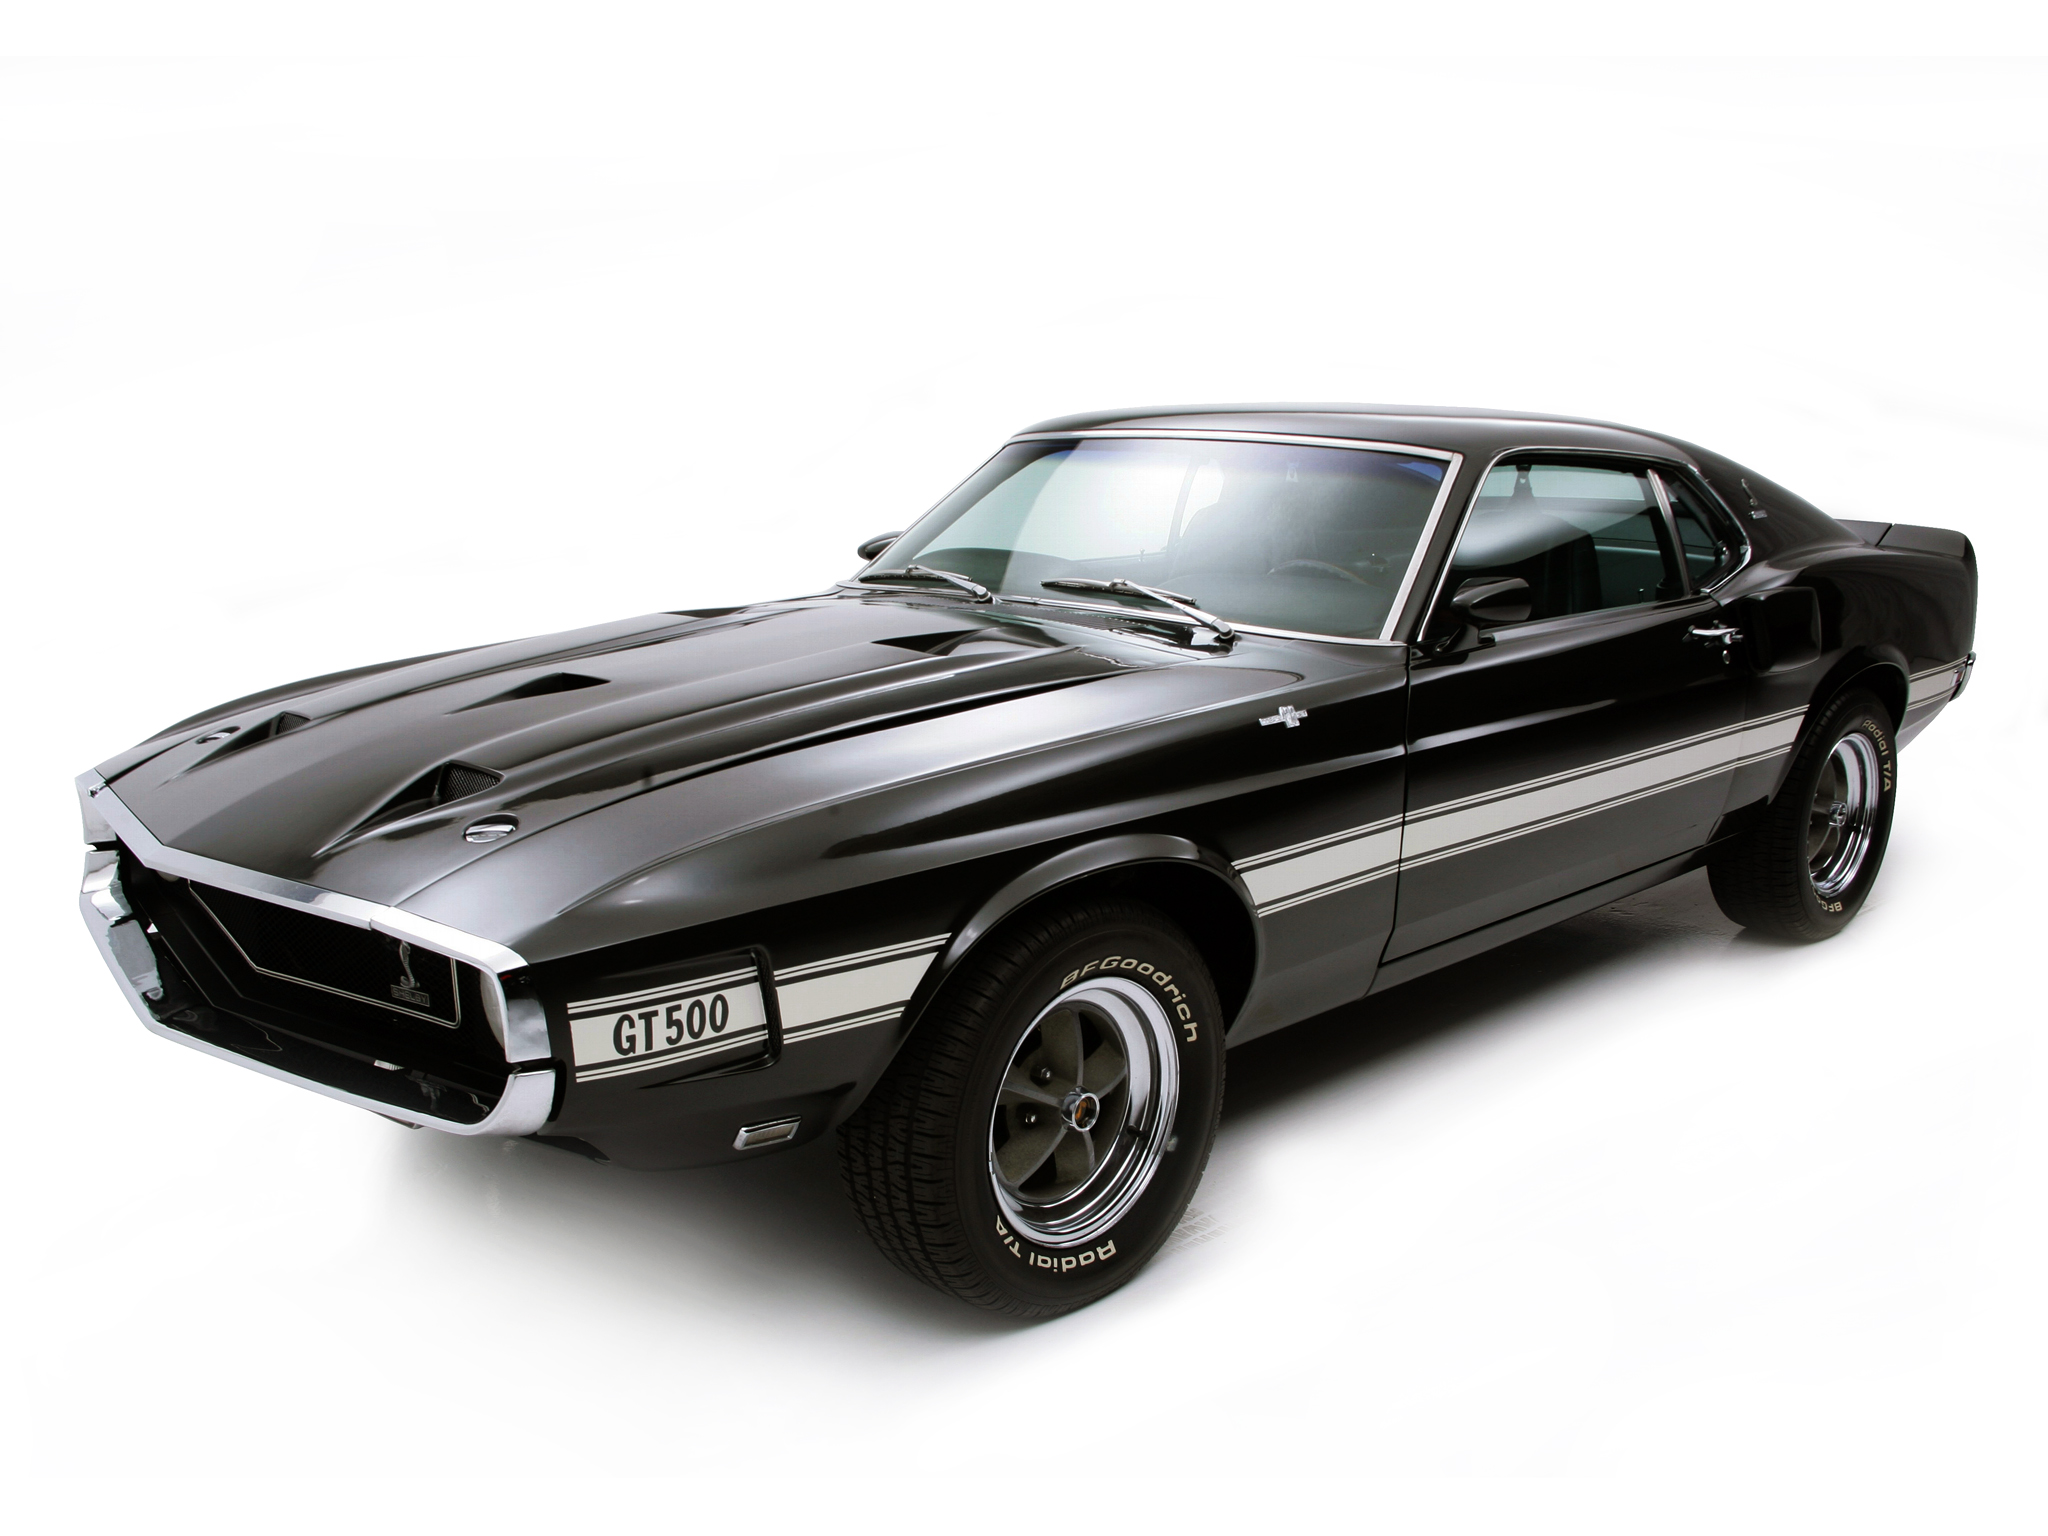 Shelby Gt500 Ford Mustang Classic Muscle J Wallpaper